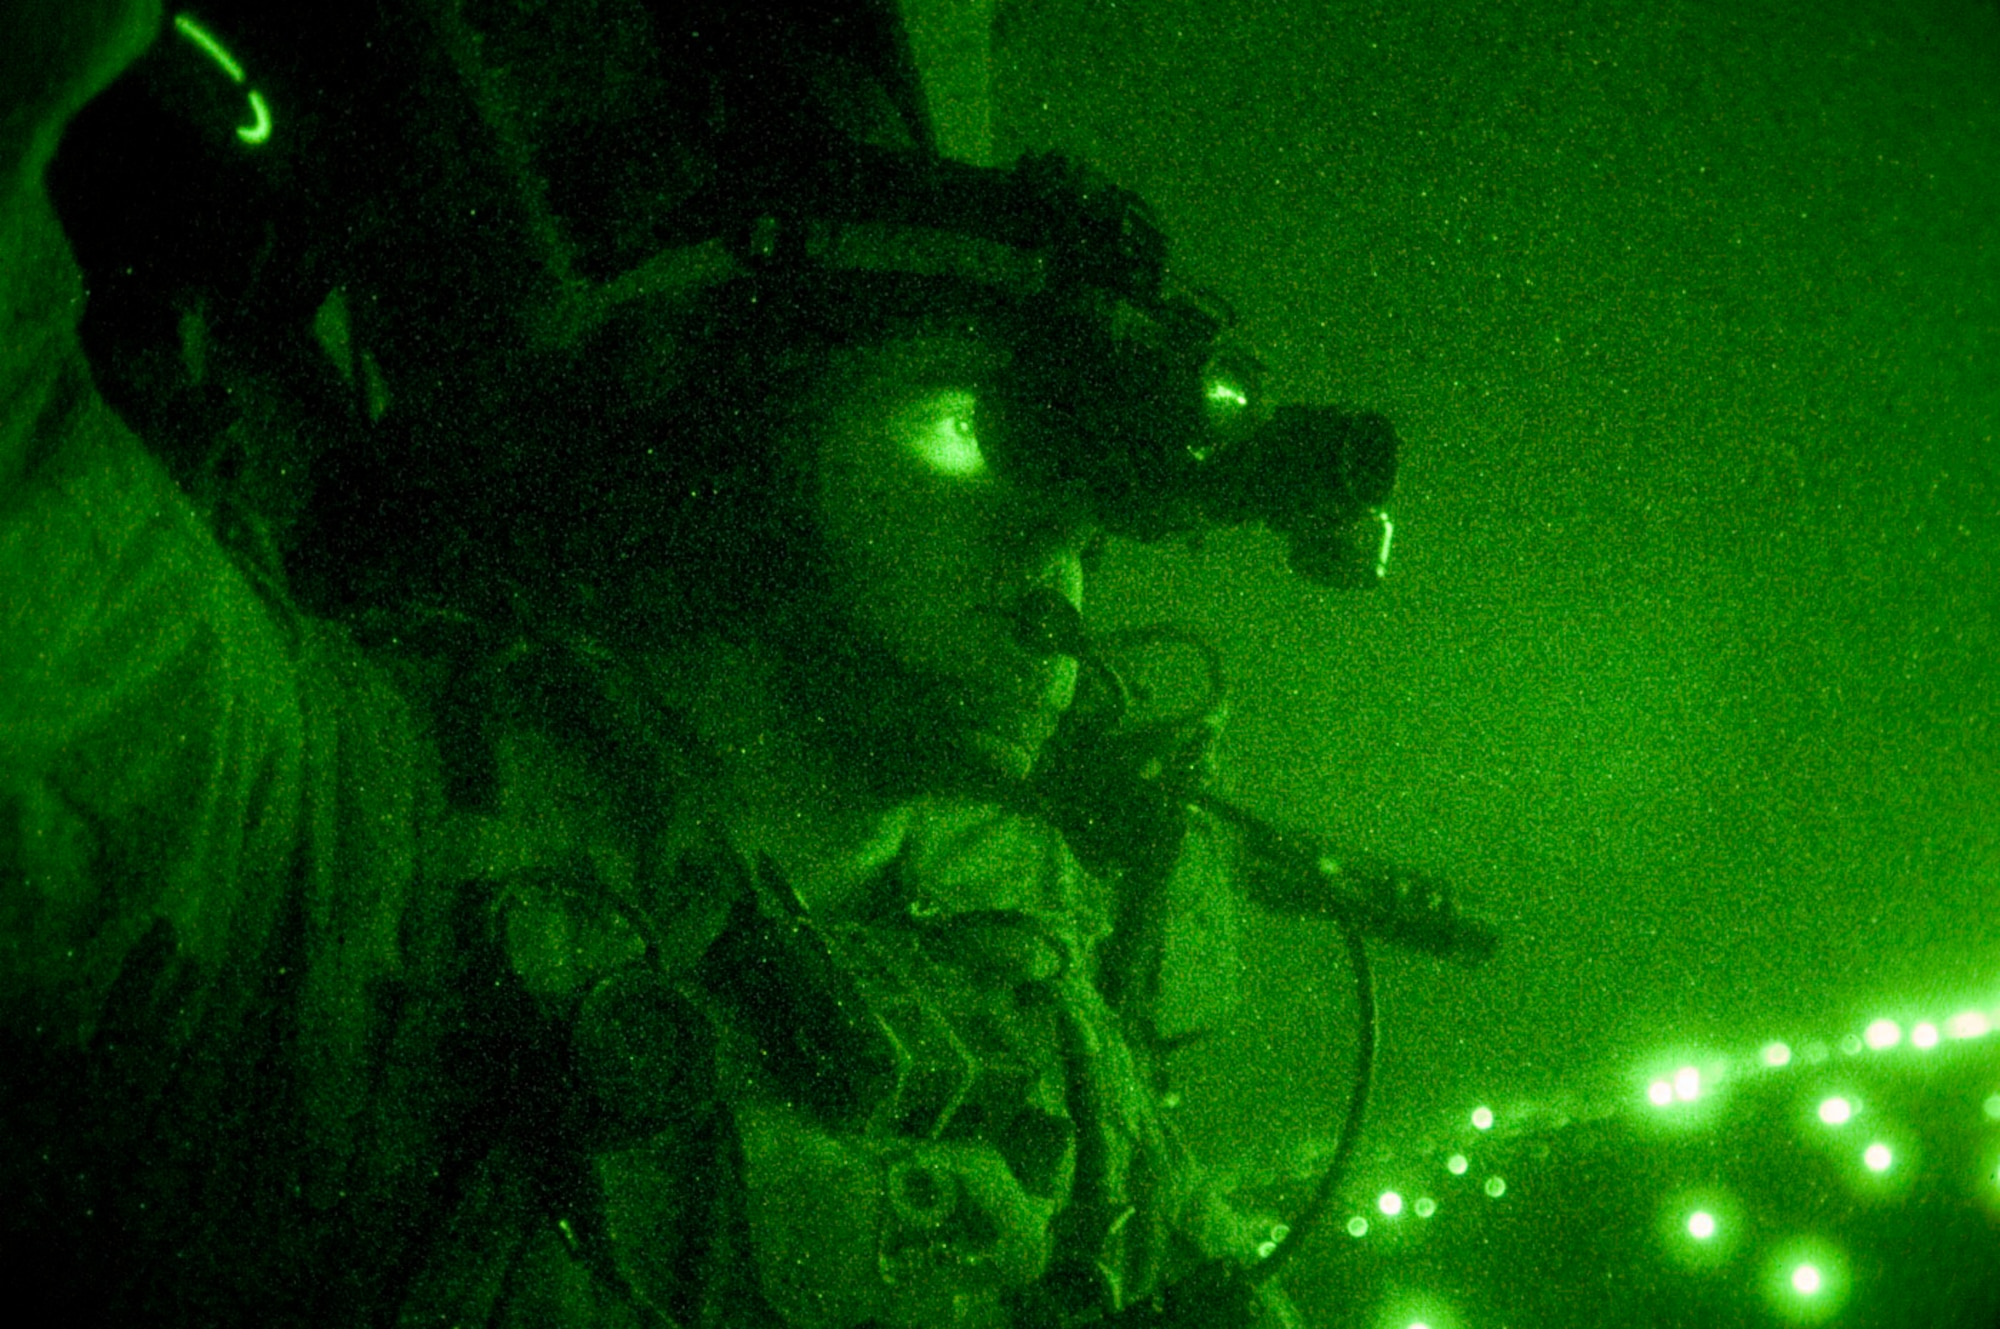 A pararescue jumper, equipped with night vision goggles, scans the Iraqi terrain during a combat search and rescue rehearsal mission Feb. 24 outside Balad Air Base, Iraq. He and his teammates use these rehearsal missions to stay proficient. They are assigned to the 64th Expeditionary Rescue Squadron. (U.S. Air Force photo/Tech. Sgt. Cecilio M. Ricardo Jr.)